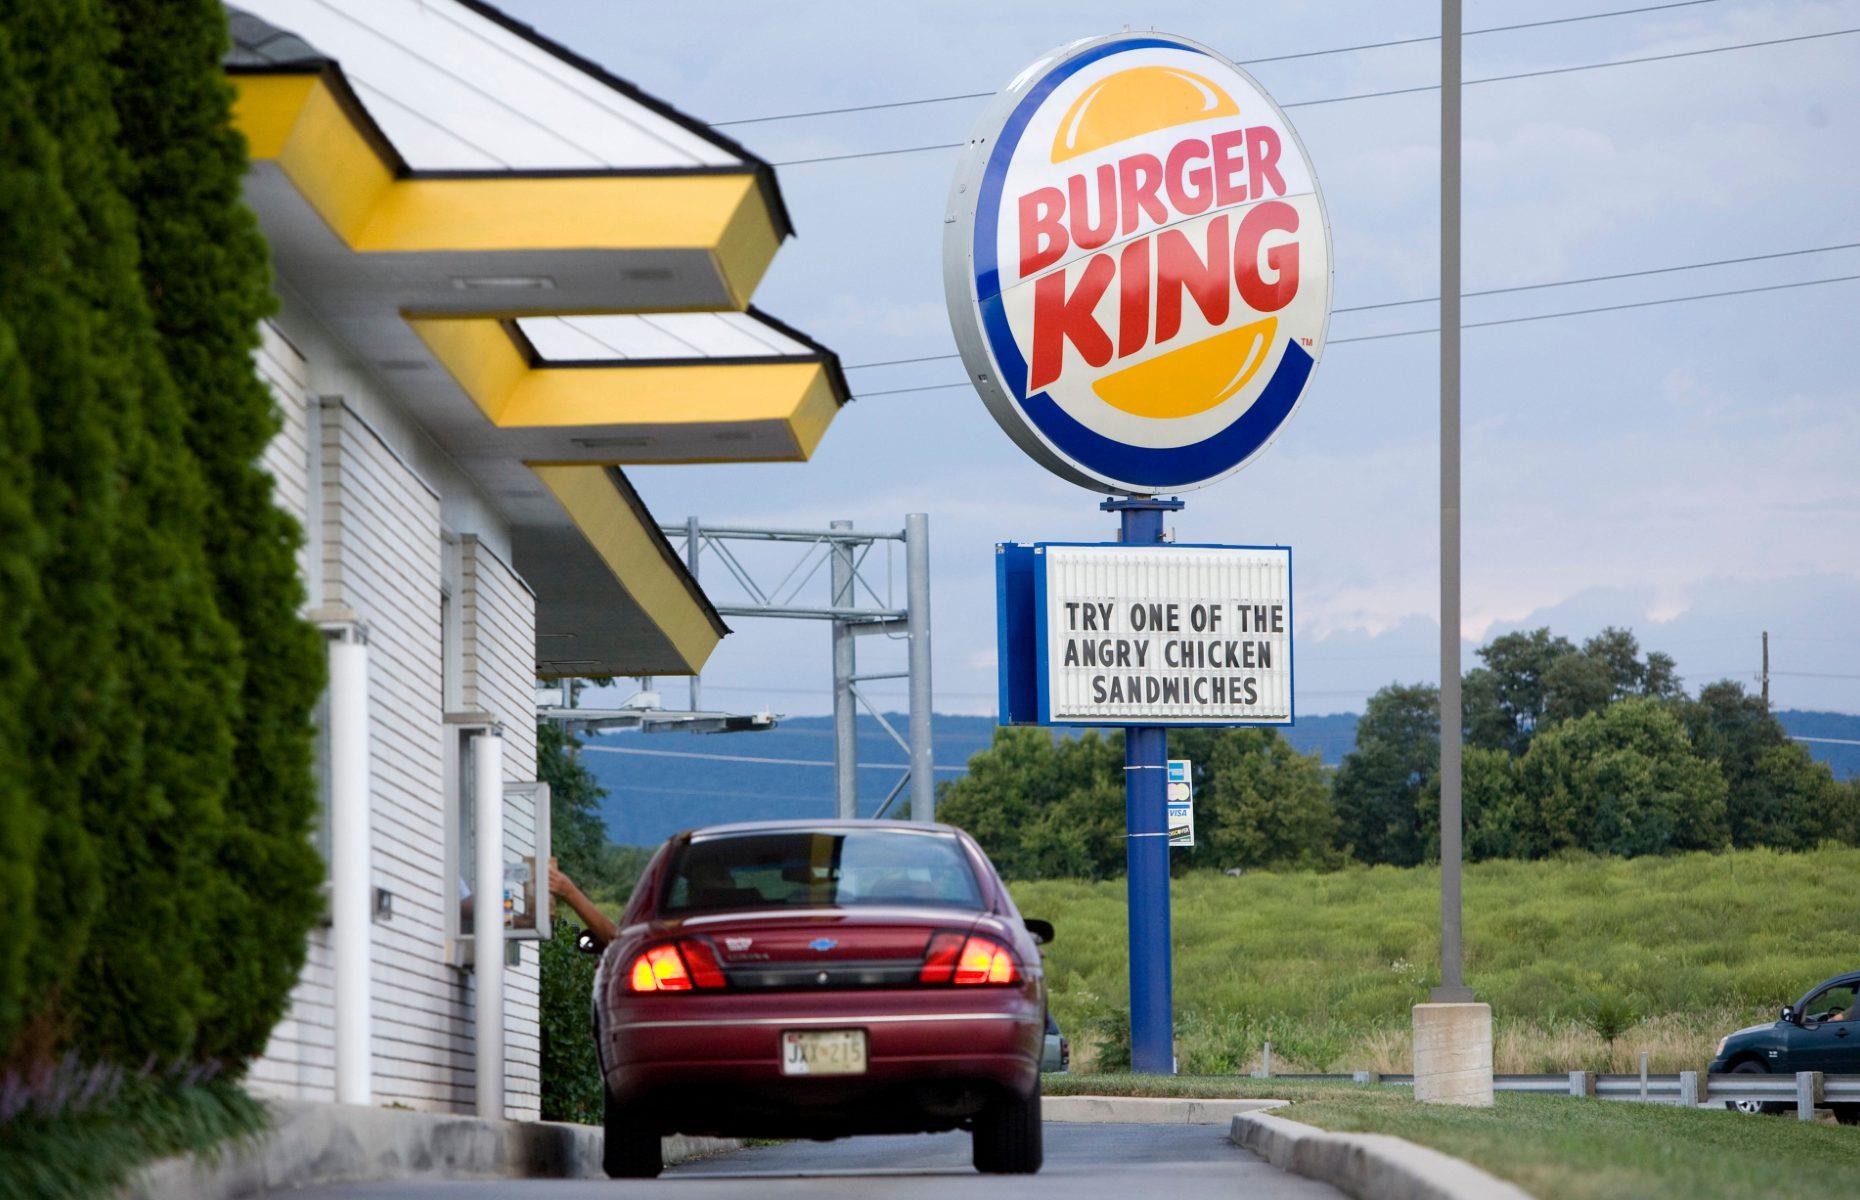 In the 2000s, drivers didn’t need to worry about packing snacks for their road trip as the era of drive-thru fast-food outlets was in full swing. In fact, you could also find drive-thru pharmacies, grocery stores, liquor stores, coffee shops and banks lining the country’s highways and byways by this point.